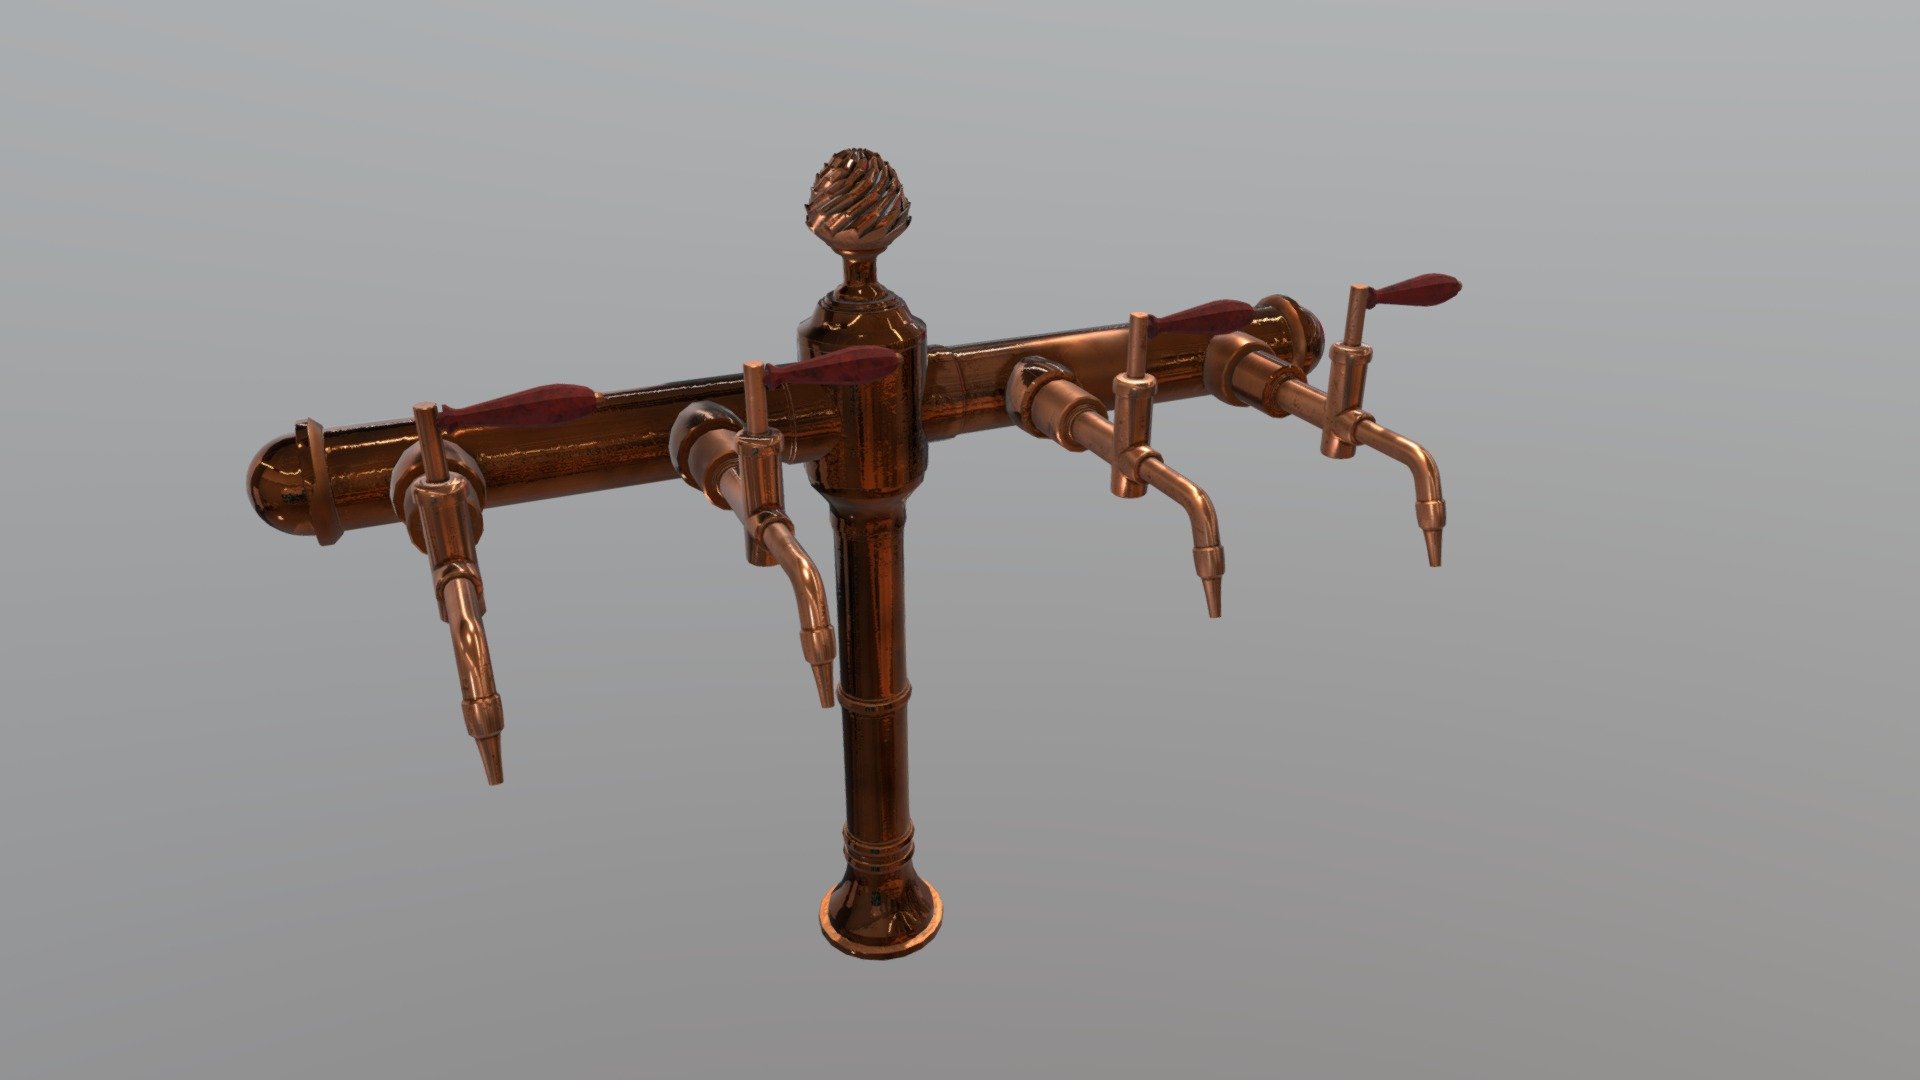 Decor for bar. Low poly obj model. ZIP-file include normal map, color, roughness and metalness maps 3d model